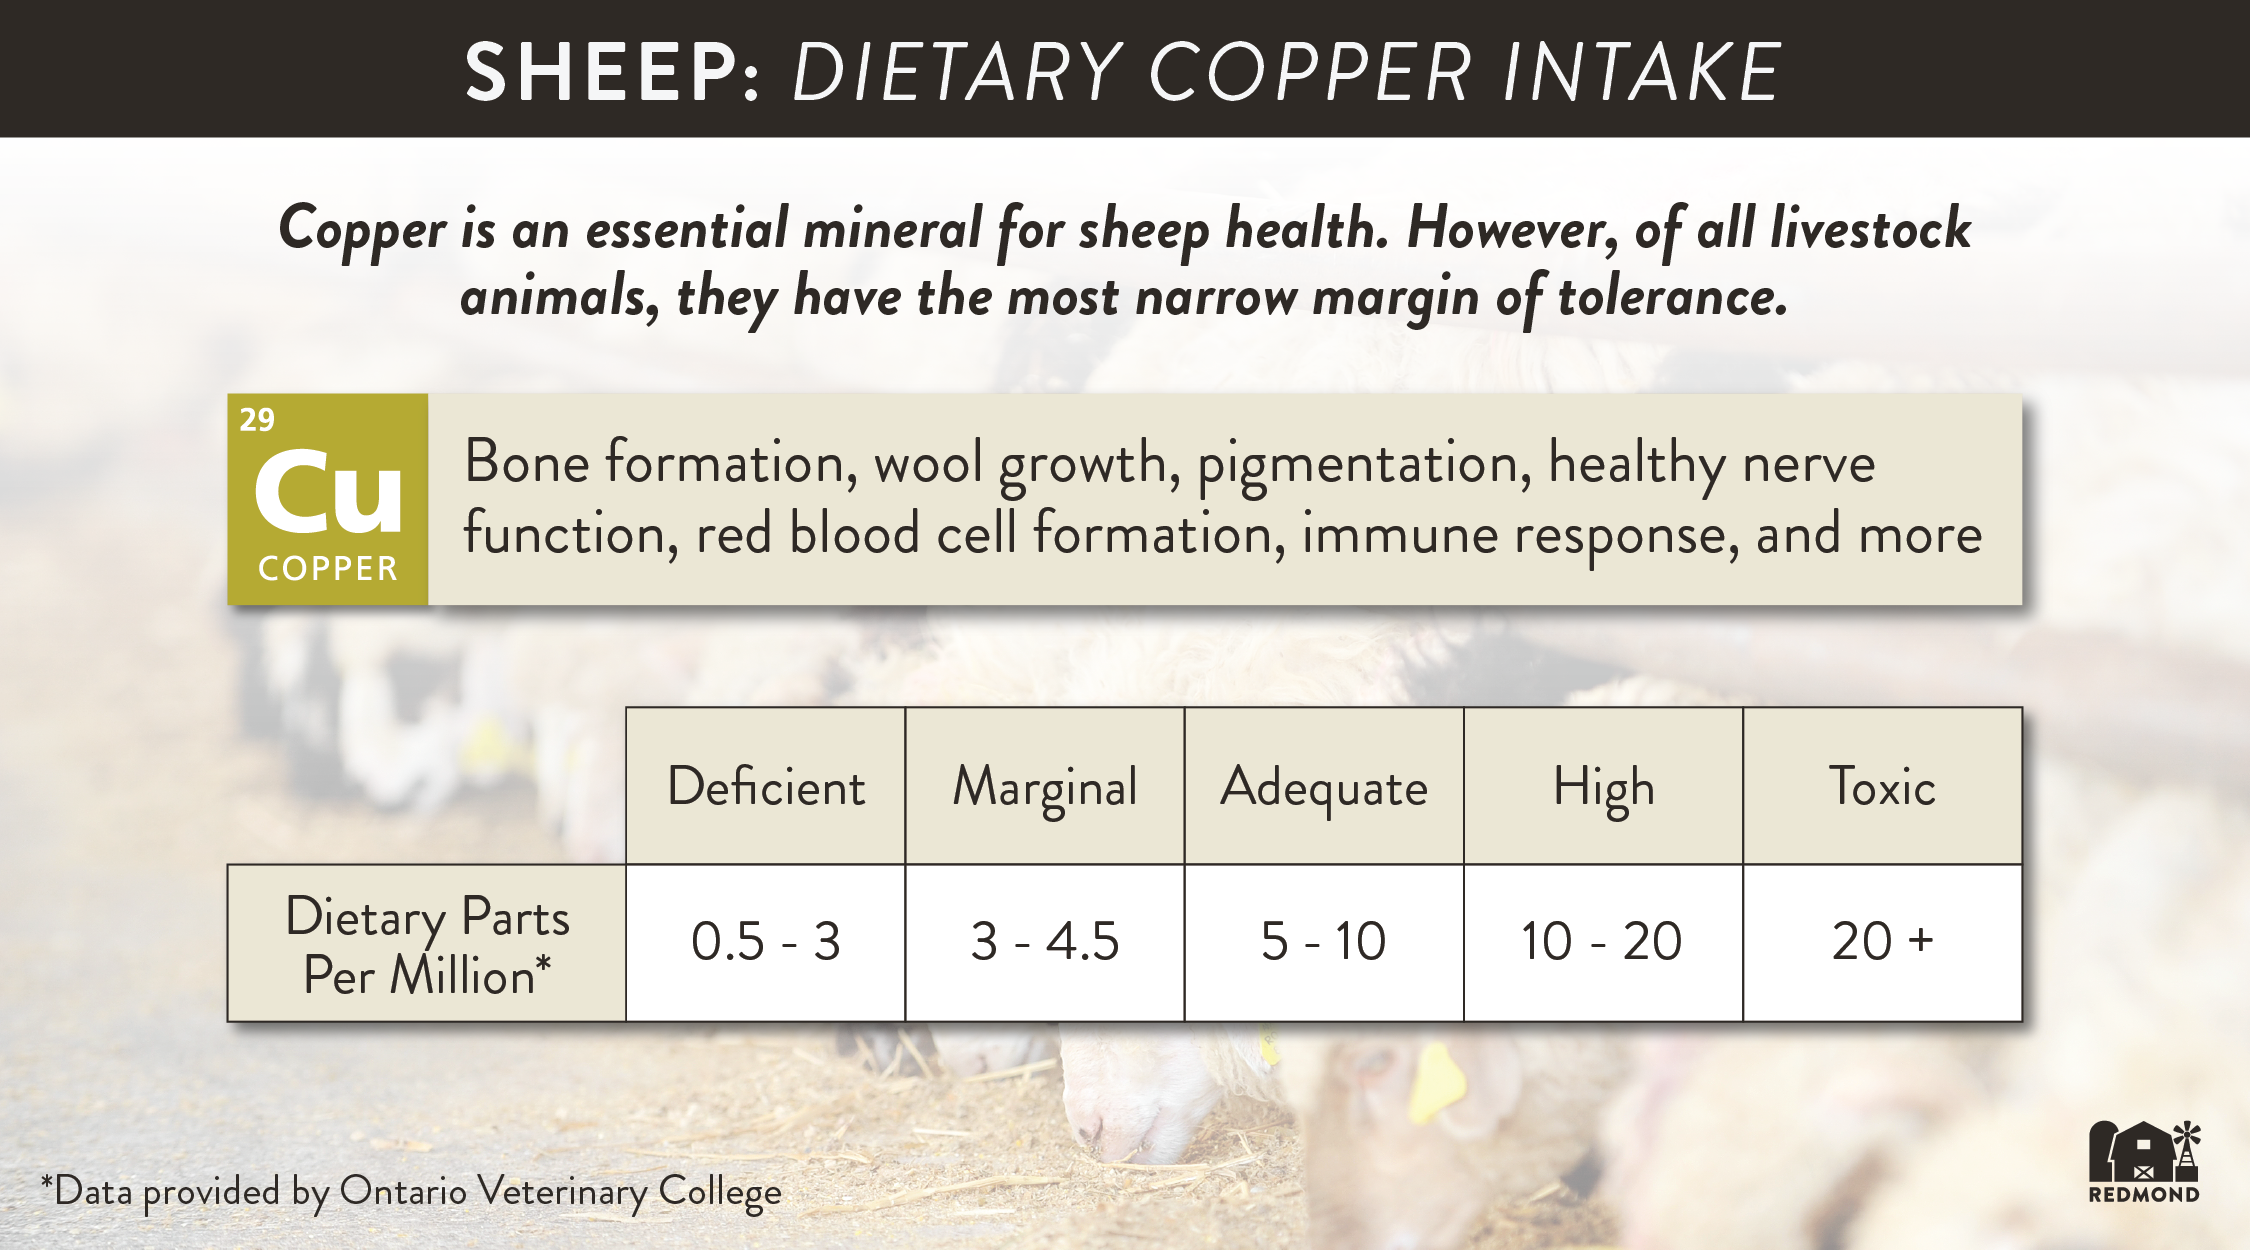 How much copper should sheep eat